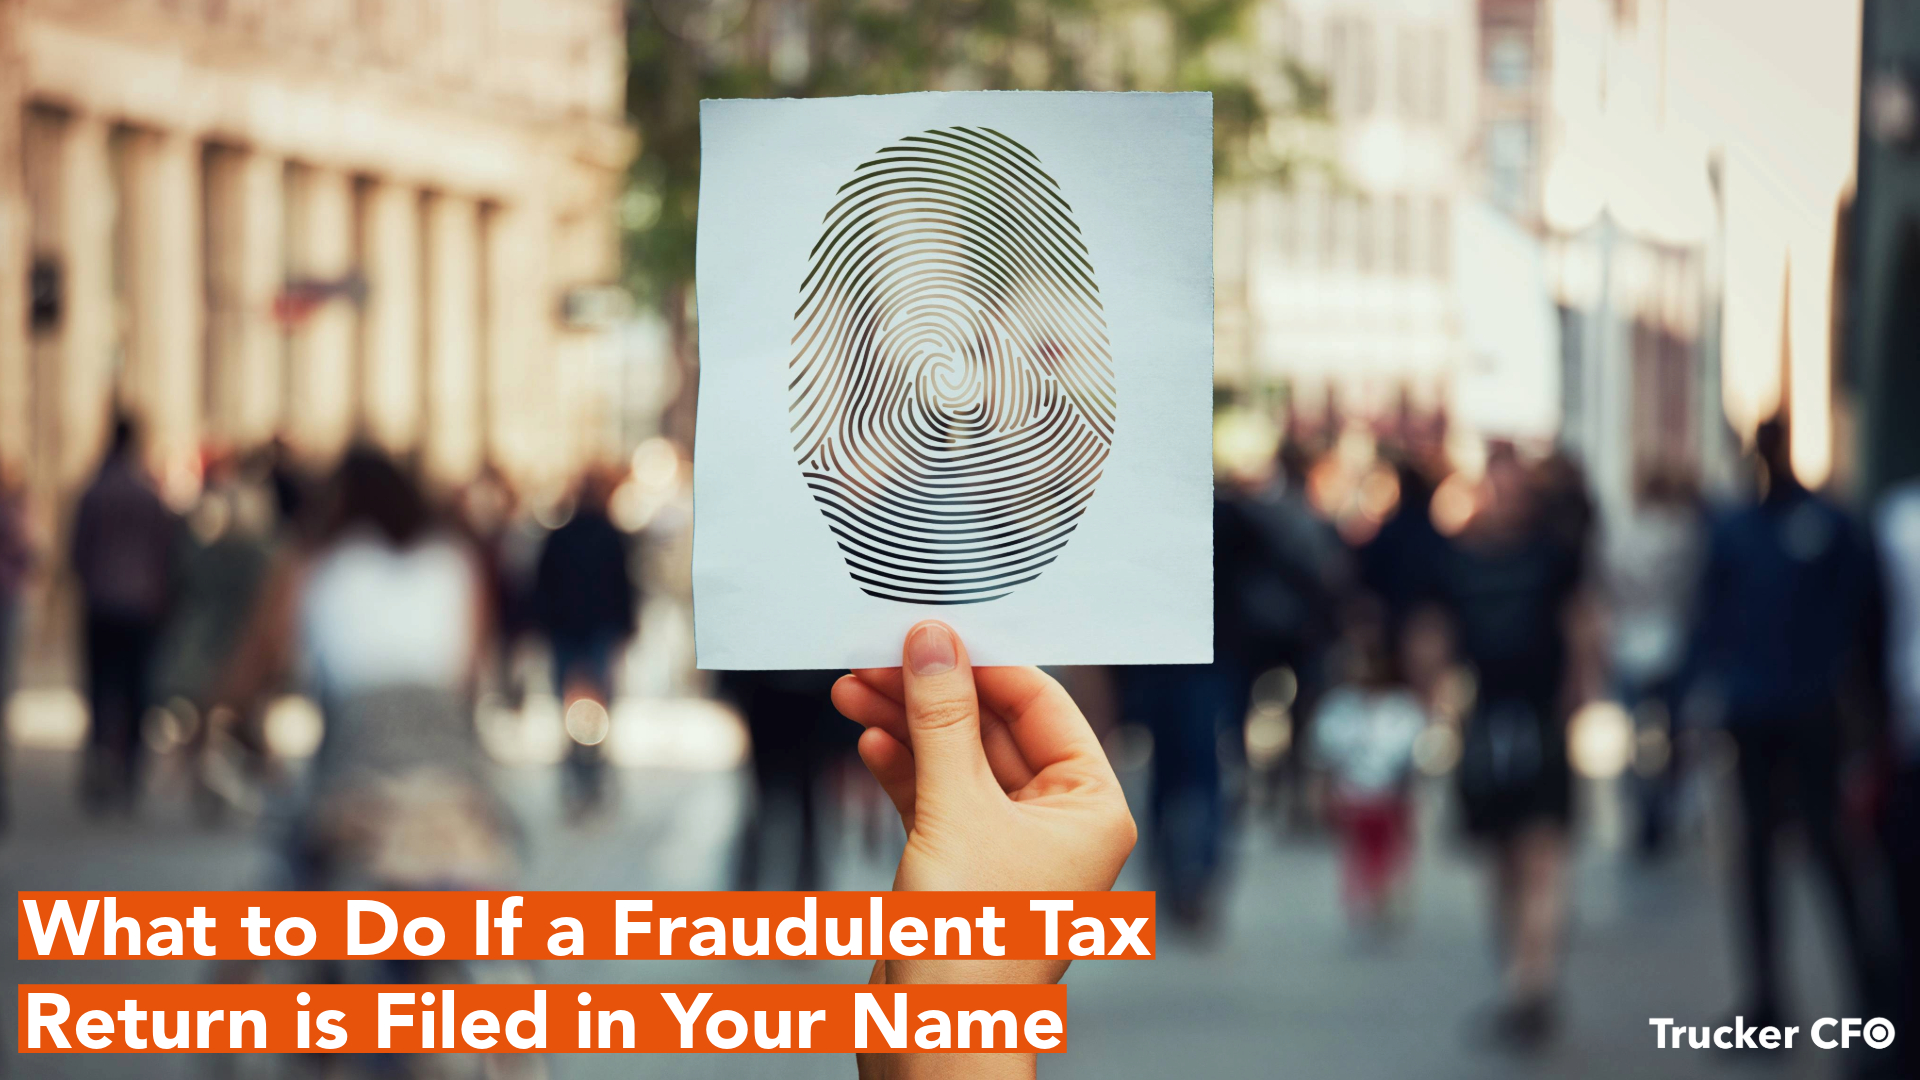 What to Do If a Fraudulent Tax Return is Filed in Your Name